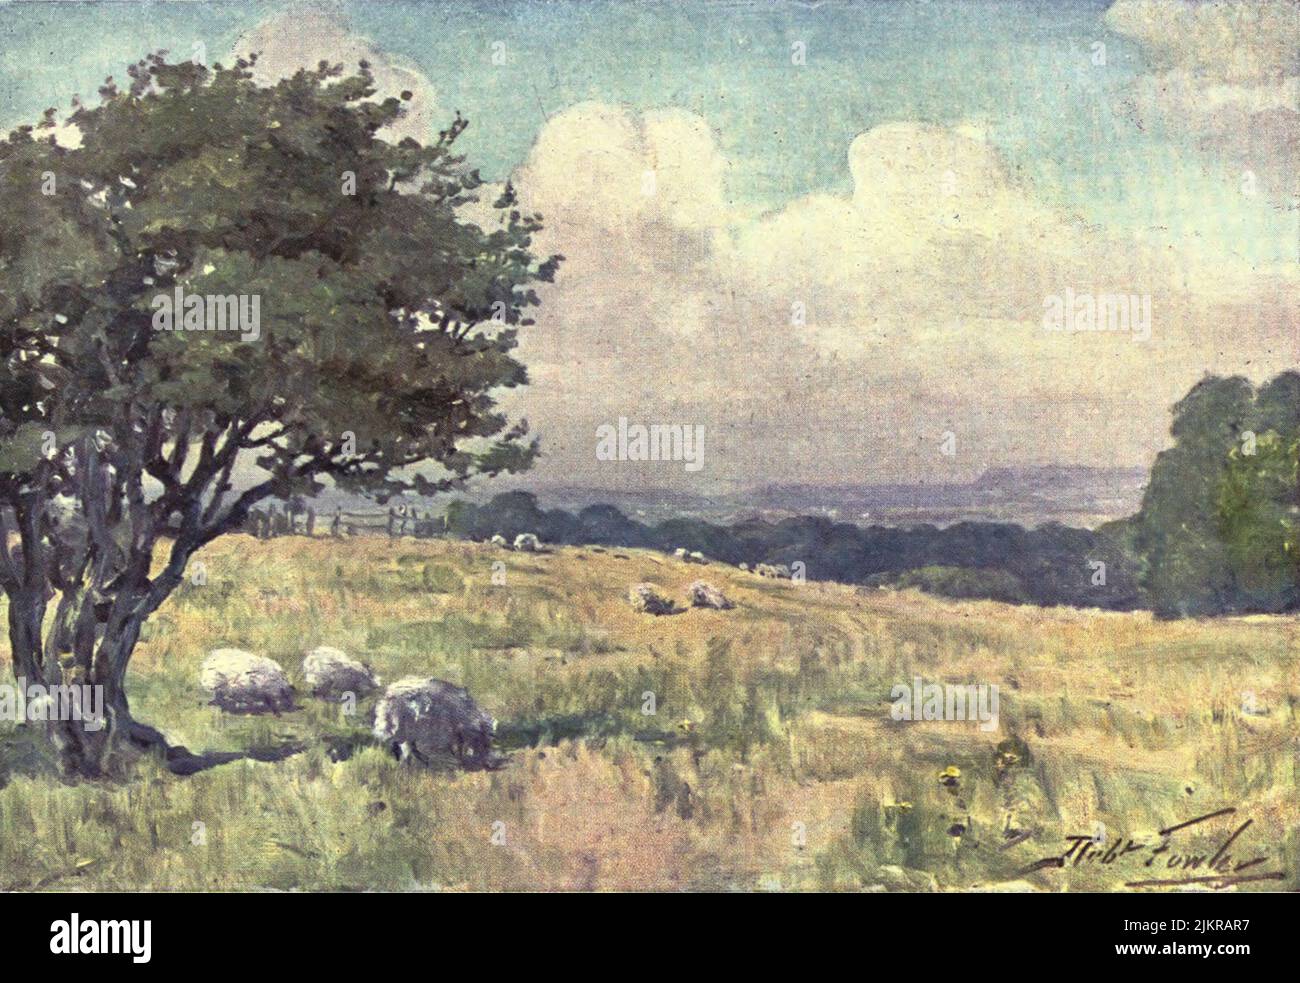 Sunny Field, near Llanberis watercolour painting by Robert Fowler from the book ' BEAUTIFUL WALES ' Described by Edward Thomas Publication date 1905 Publisher London, A. & C. Black Stock Photo